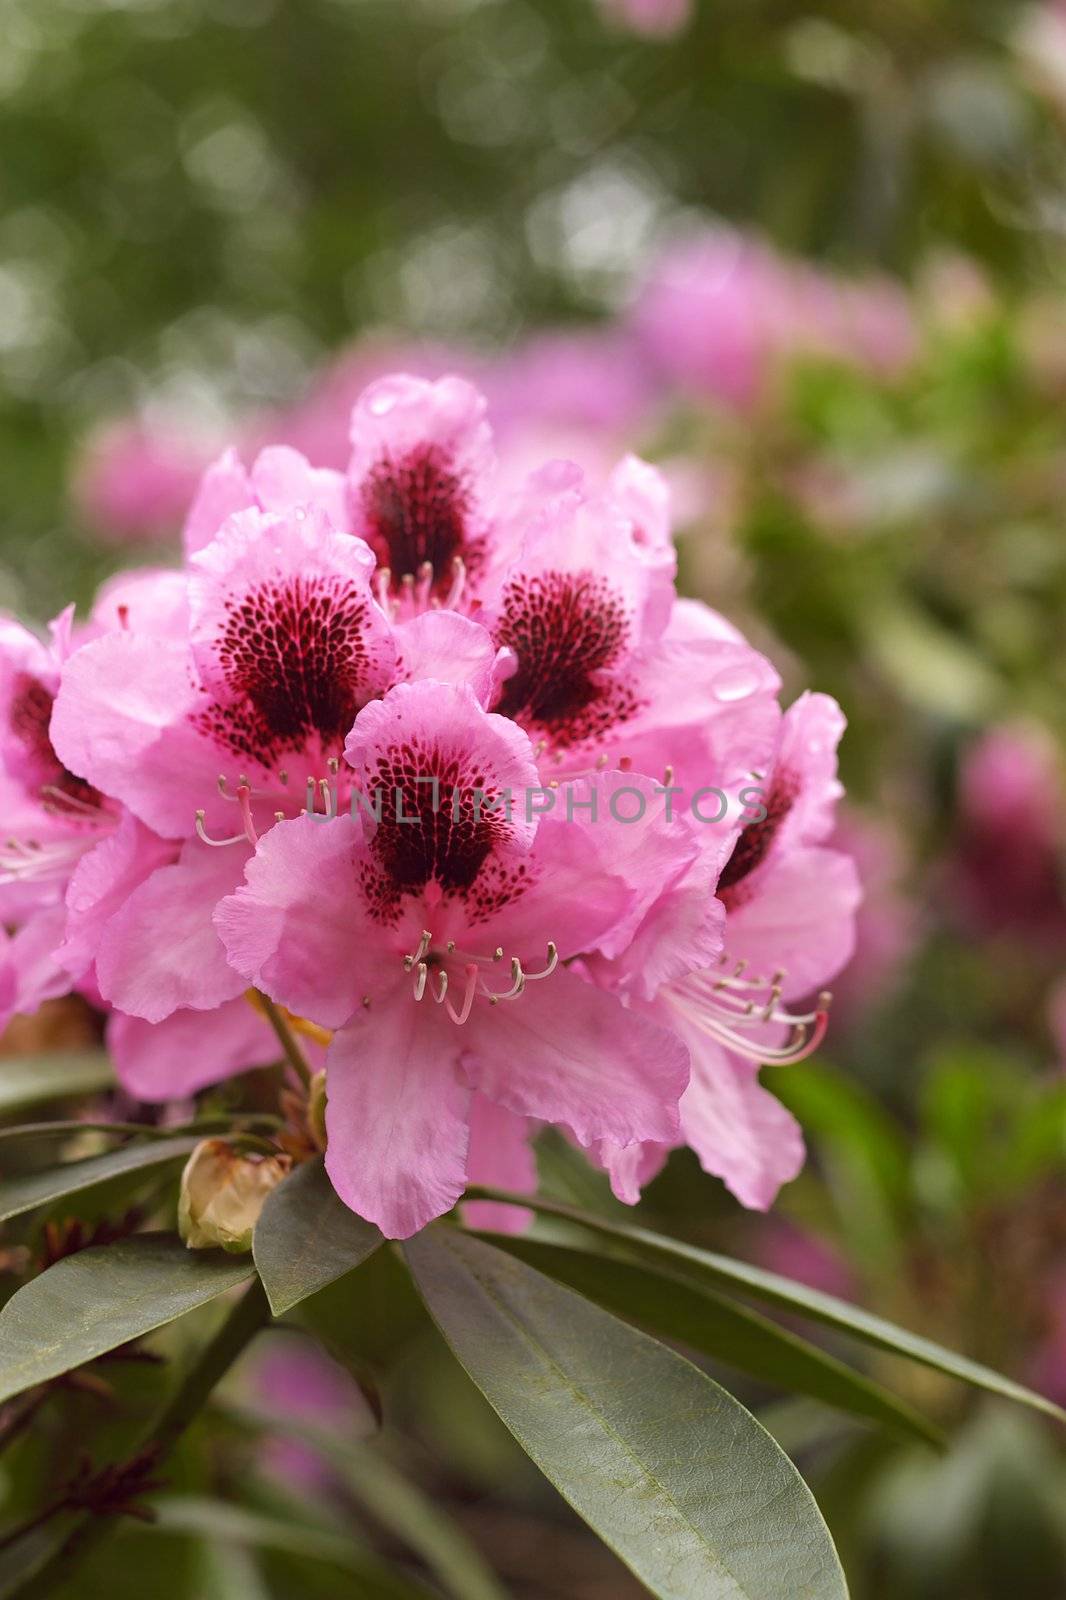 Rhododendron1 by hospitalera